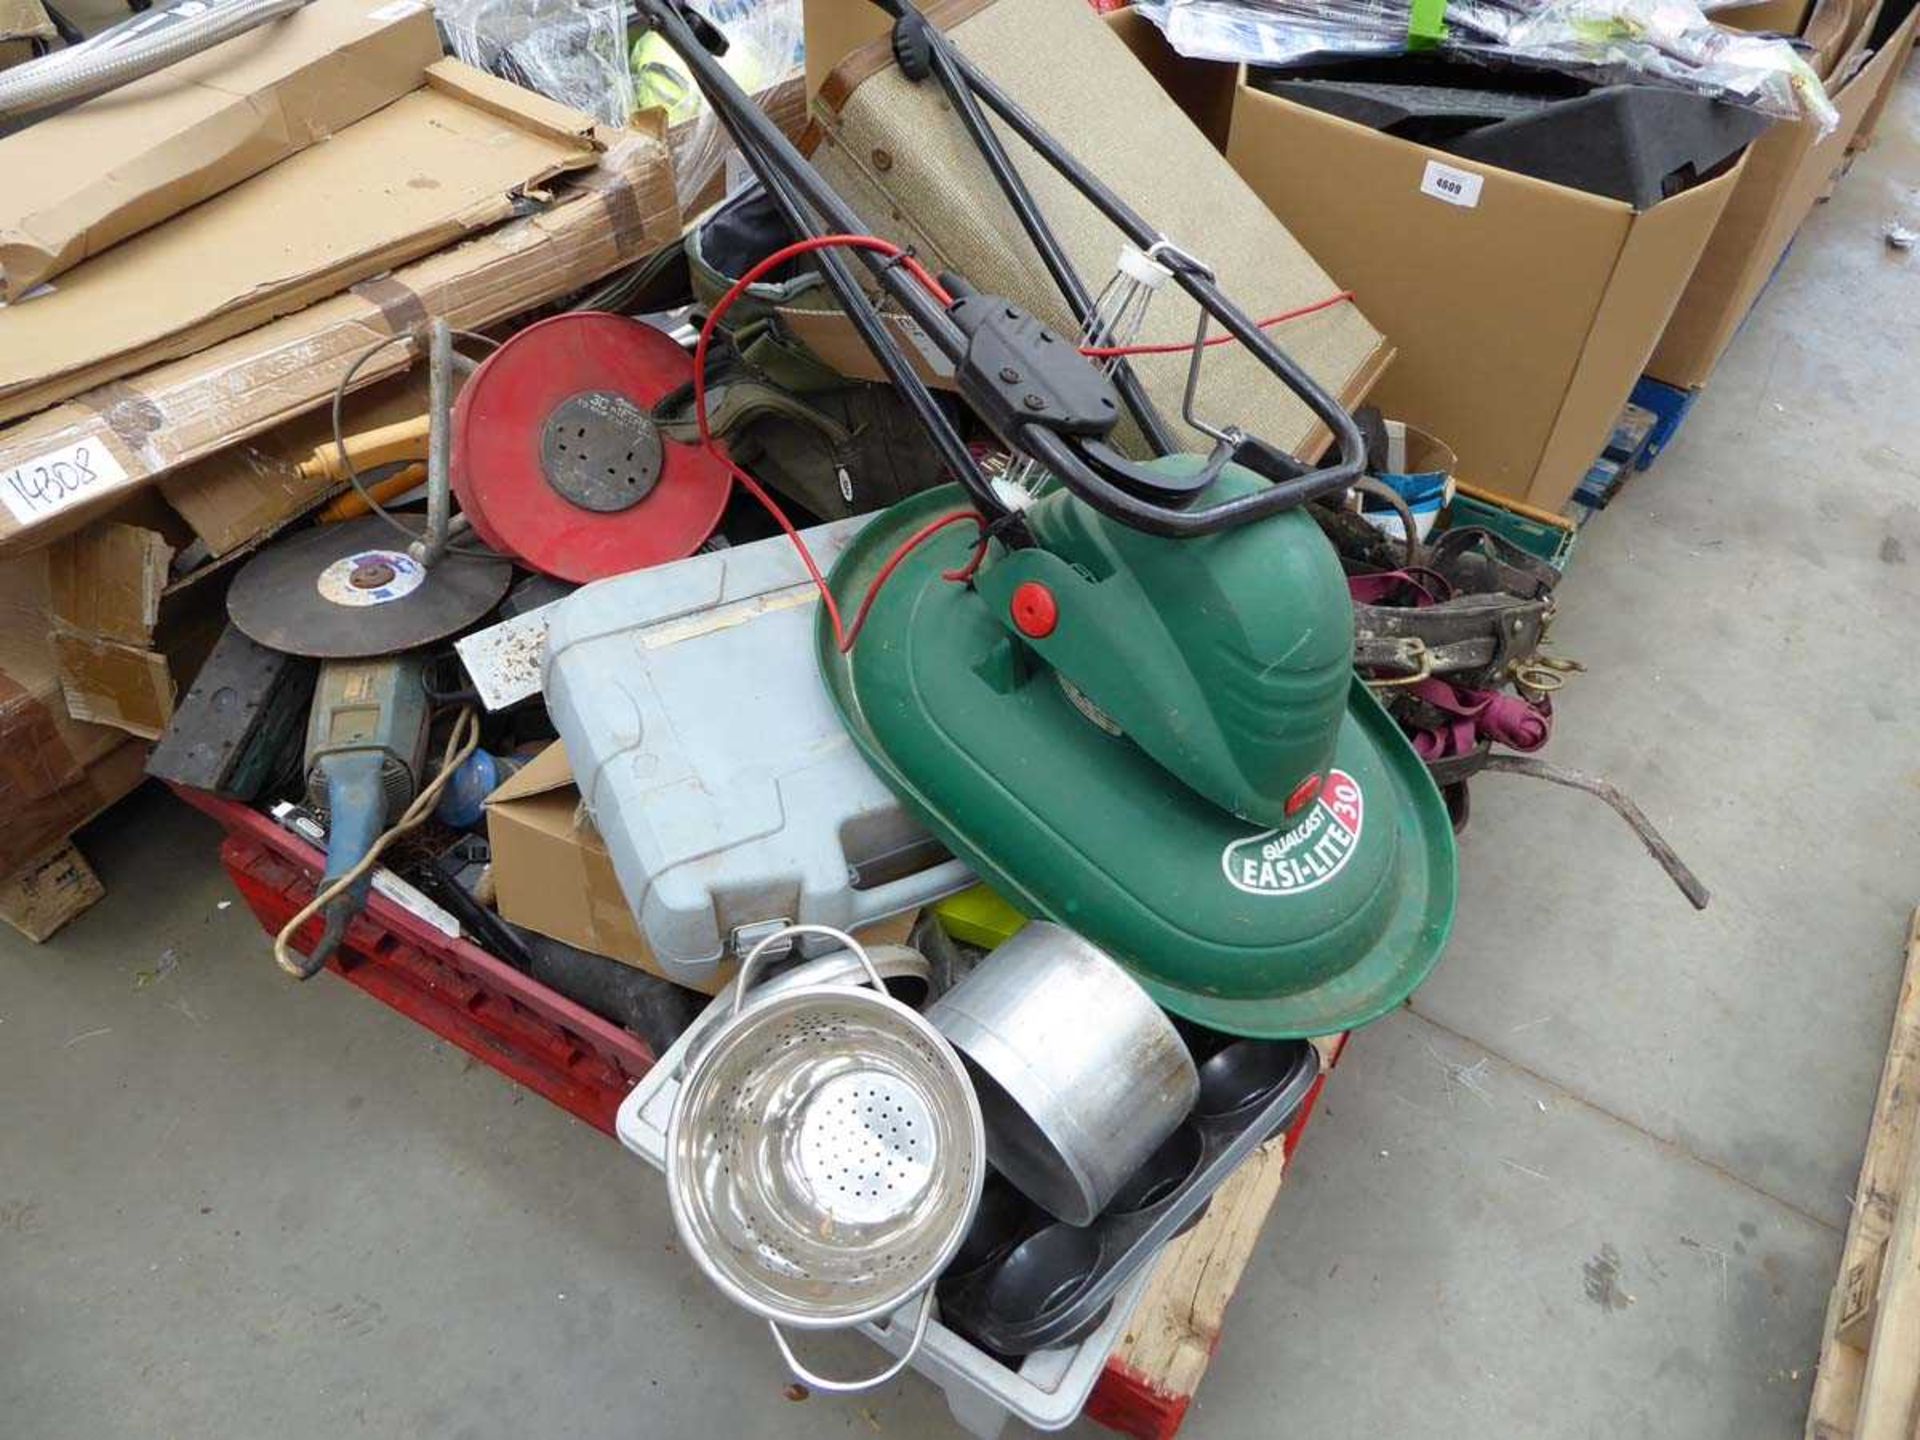 Pallet containing angle grinders, sanders, chains, extension cable, sieves, hover mower, horse tack,